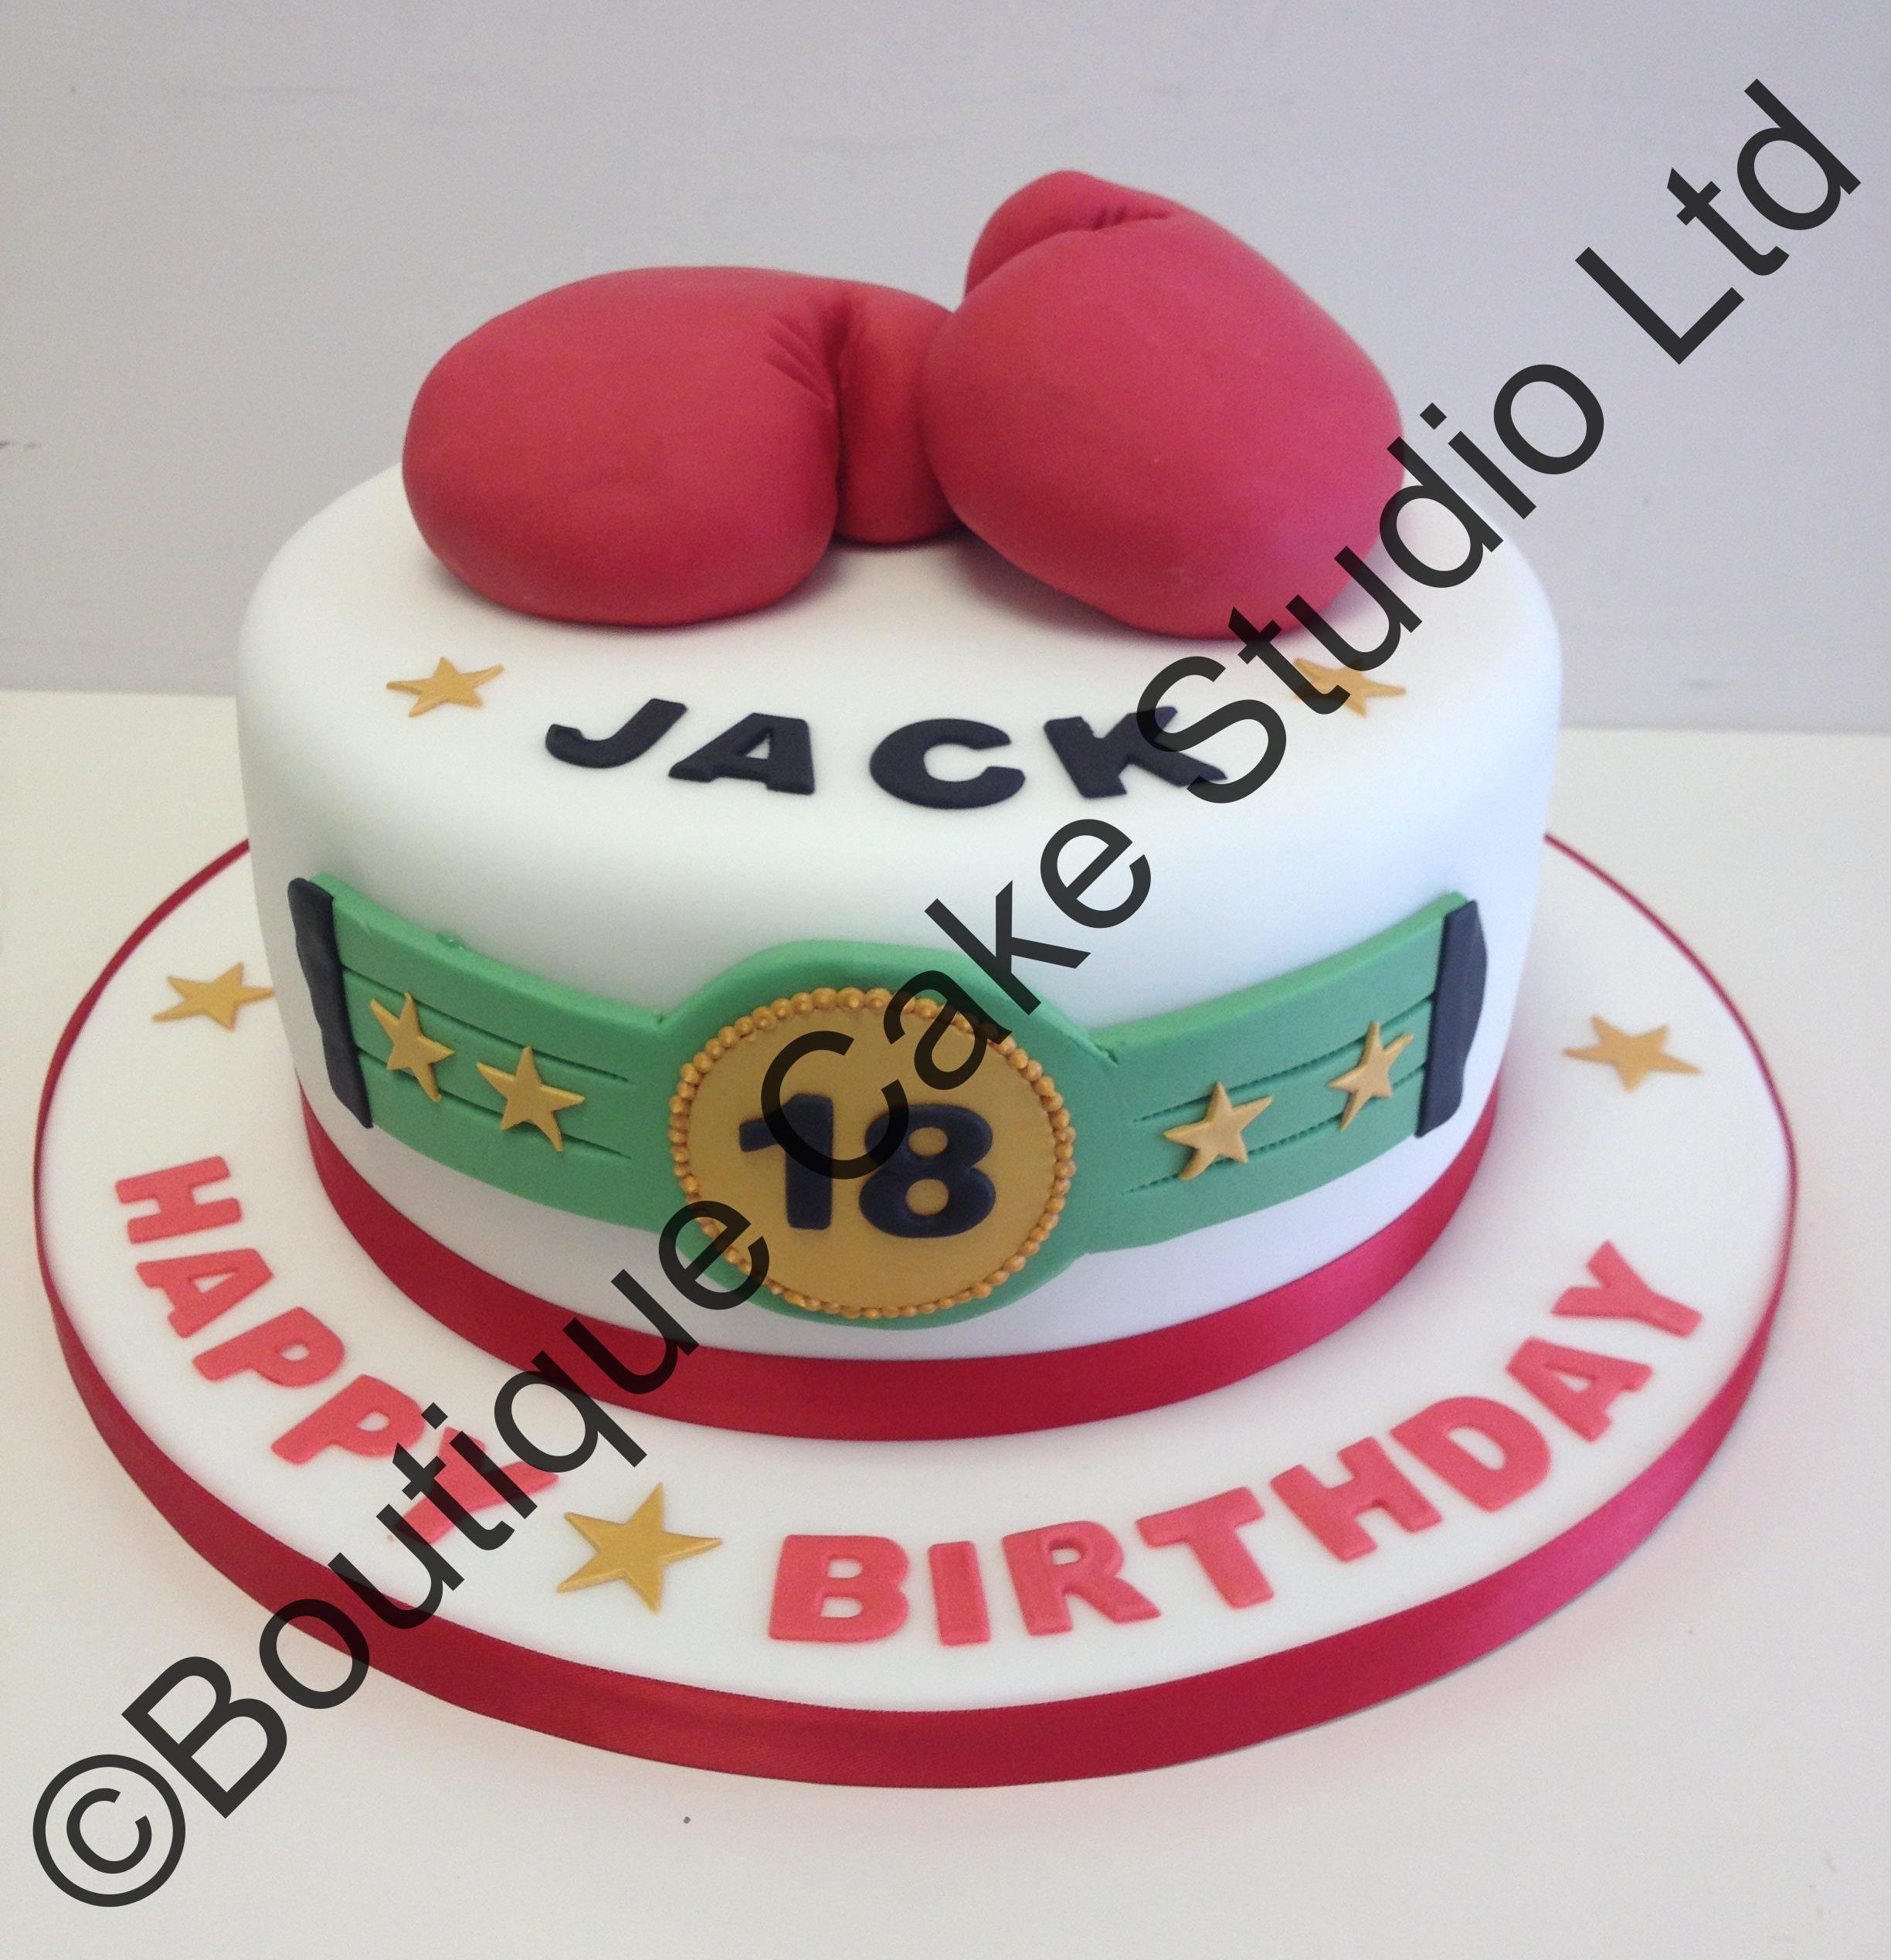 Boxing themed cake